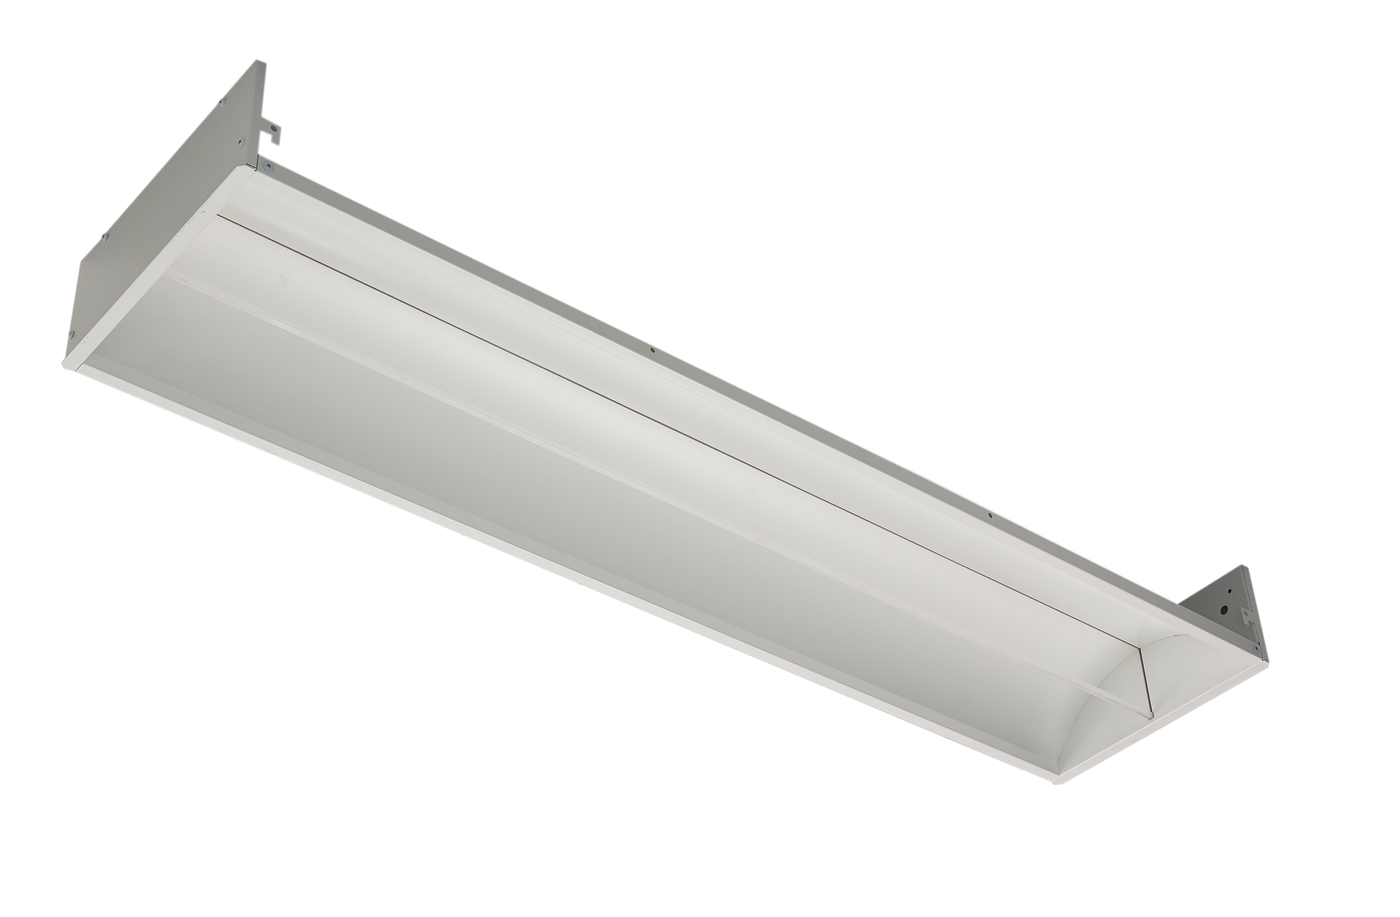 1 x 4 Foot LED Fin-Style Center Basket Troffer, Wattage Selectable: 21/28/32, 120-277V, 4000K